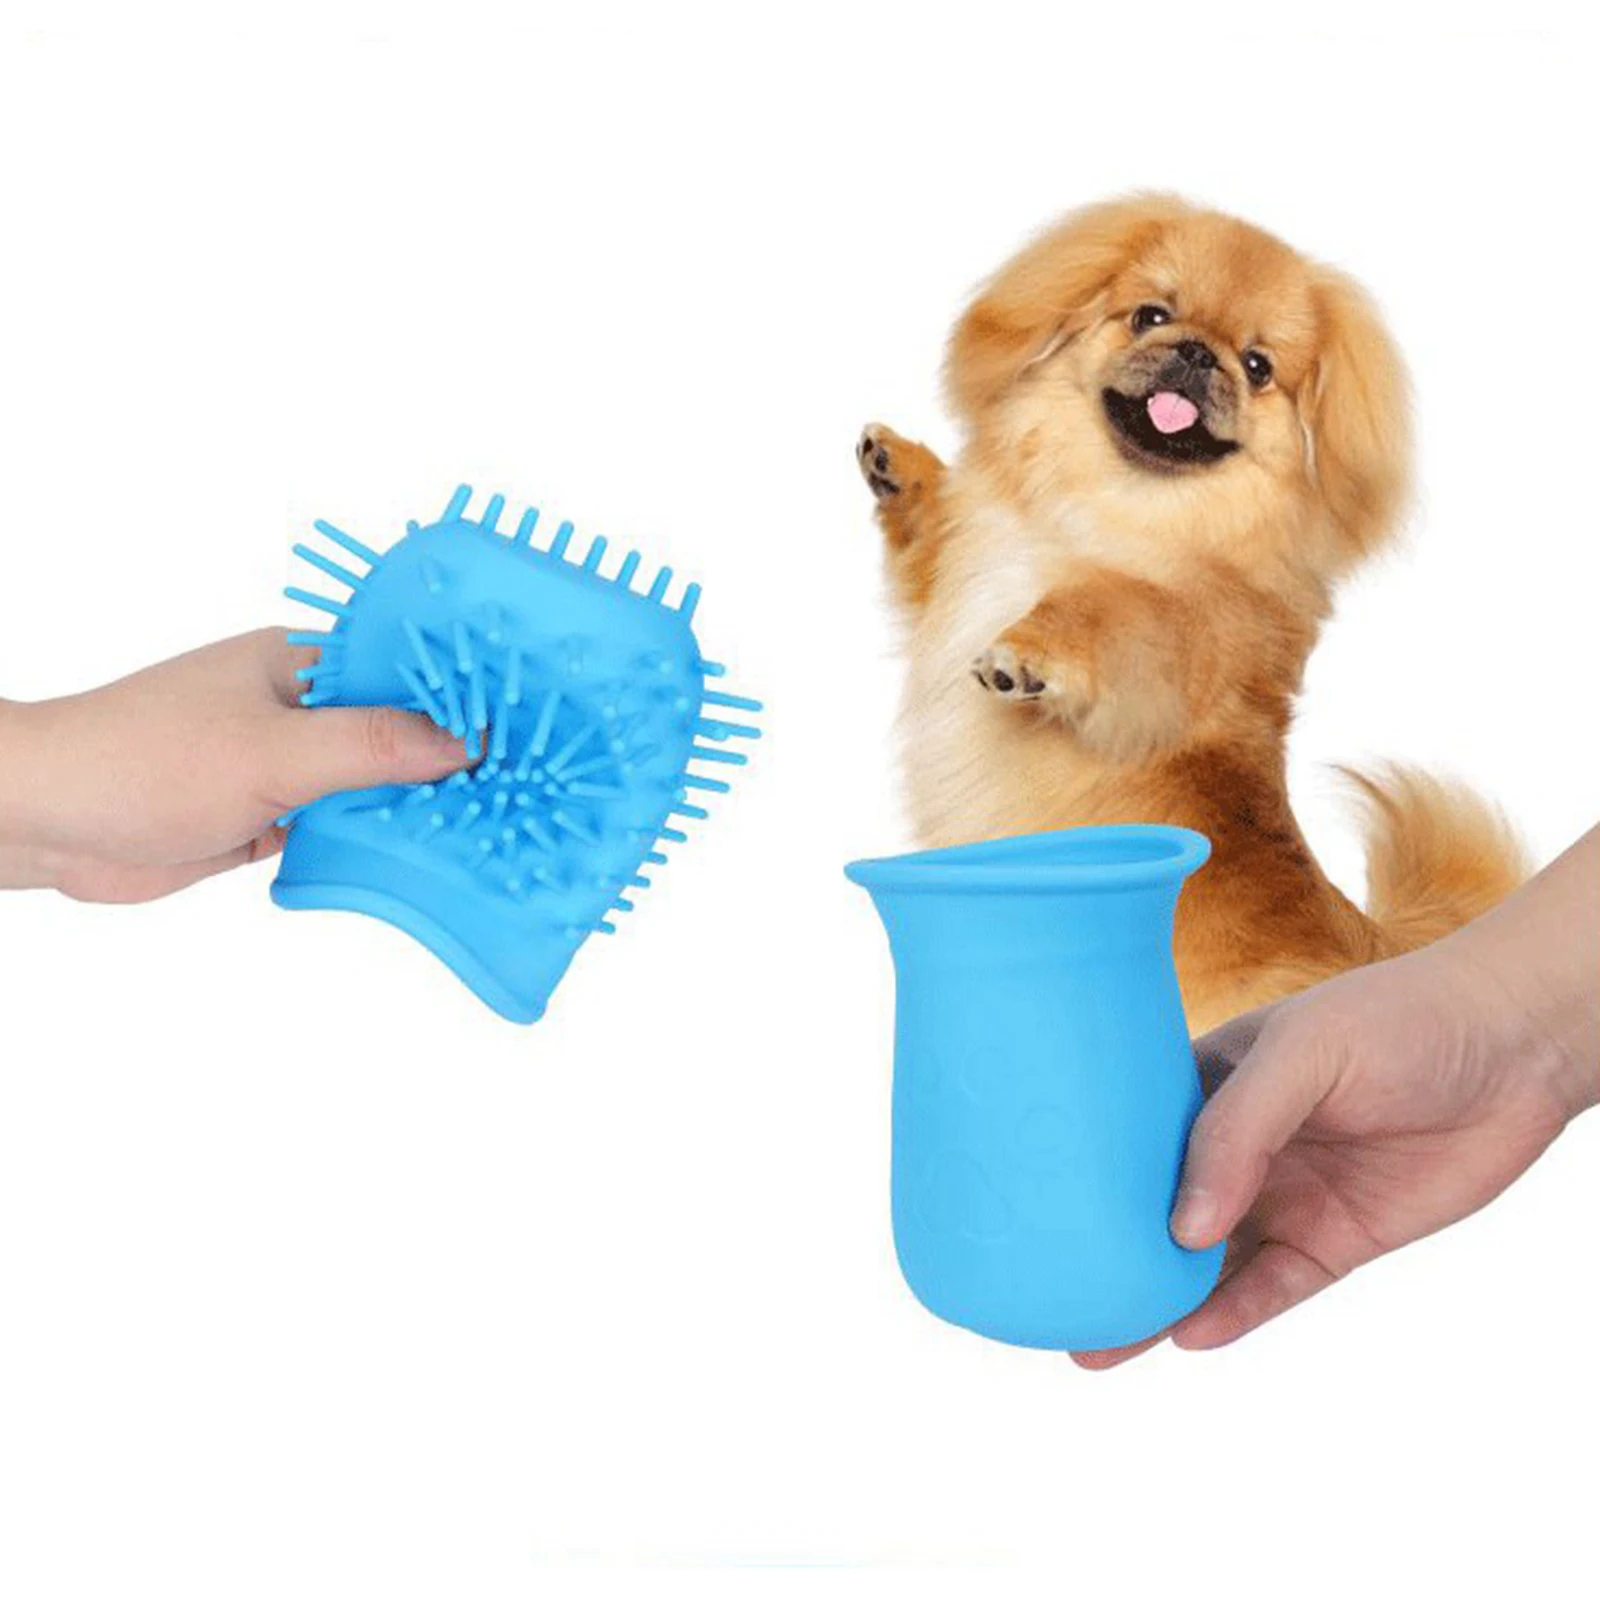 Silicone Soft Pets Paw Cleaner Cats Washer Cup Cleaning Brush Tools Plunger